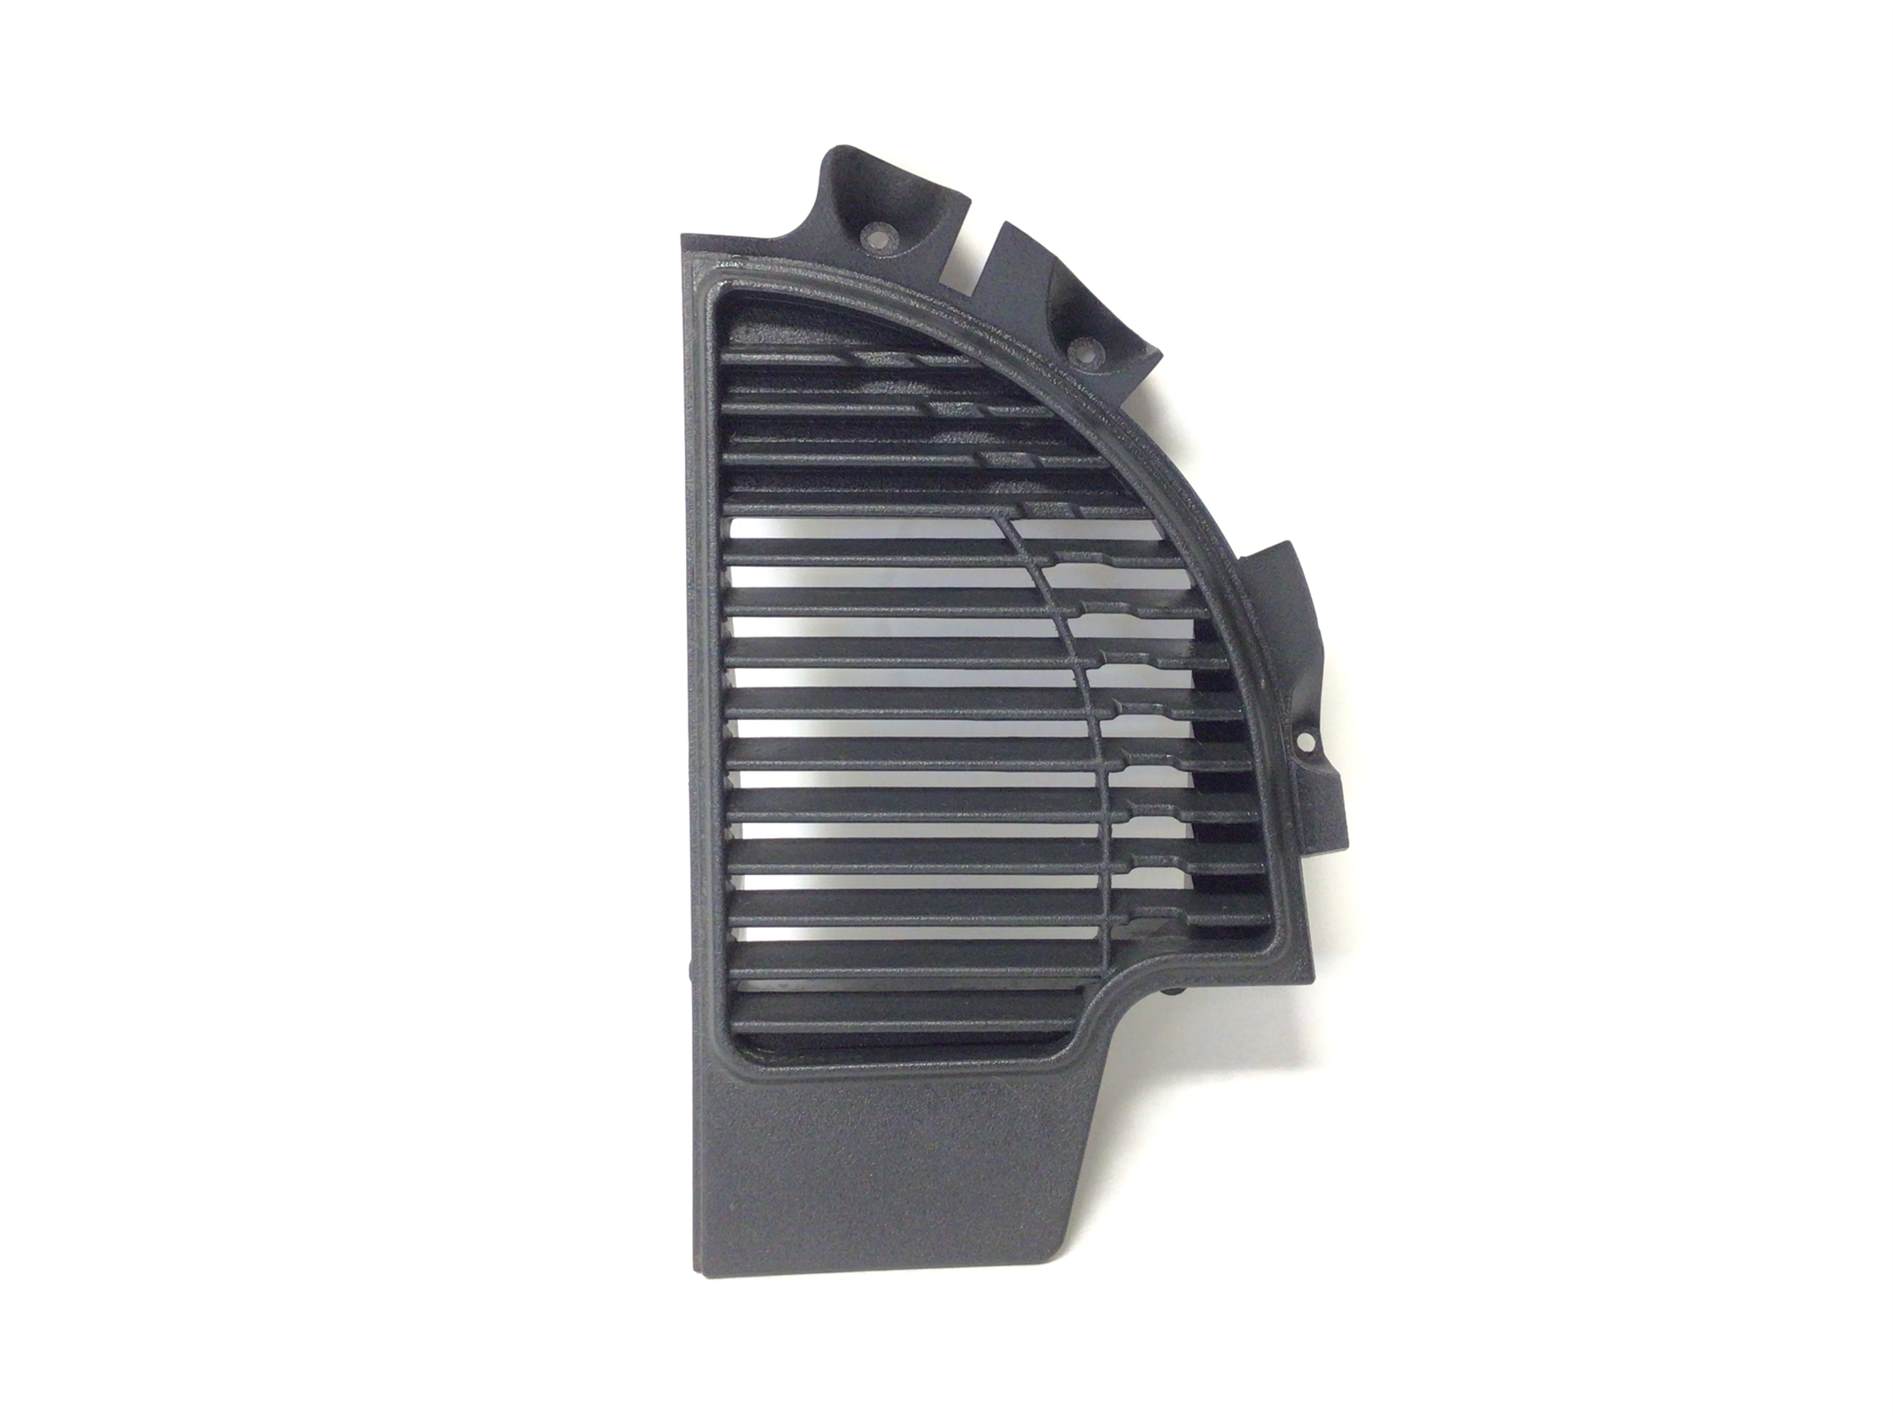 Display Console Right Fan Cover Grill (Used)